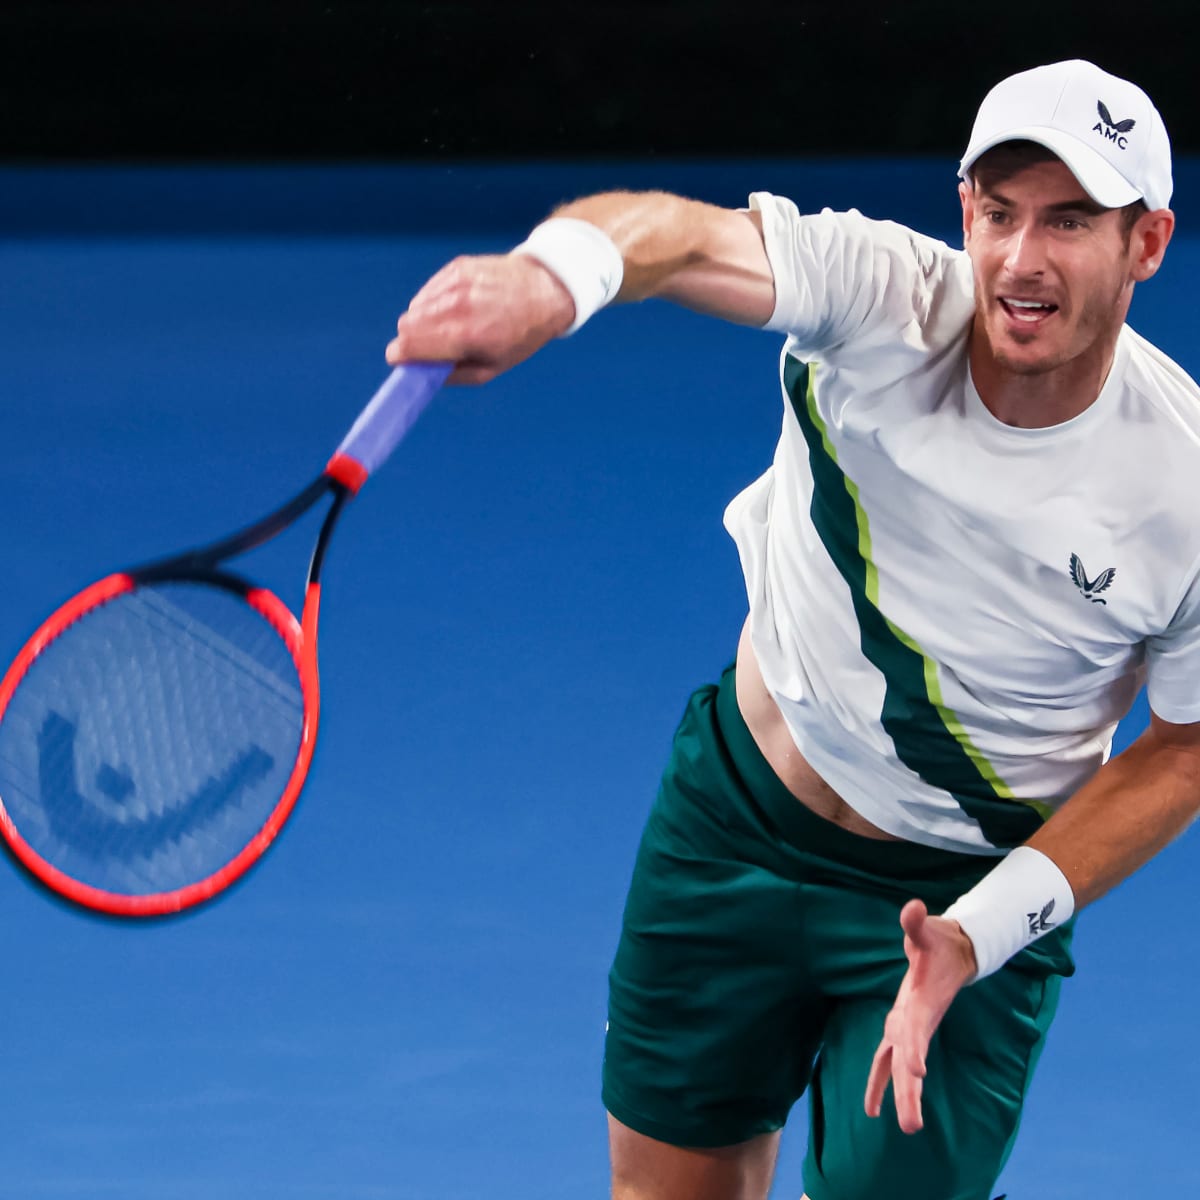 Andy Murray is back! (sort of)